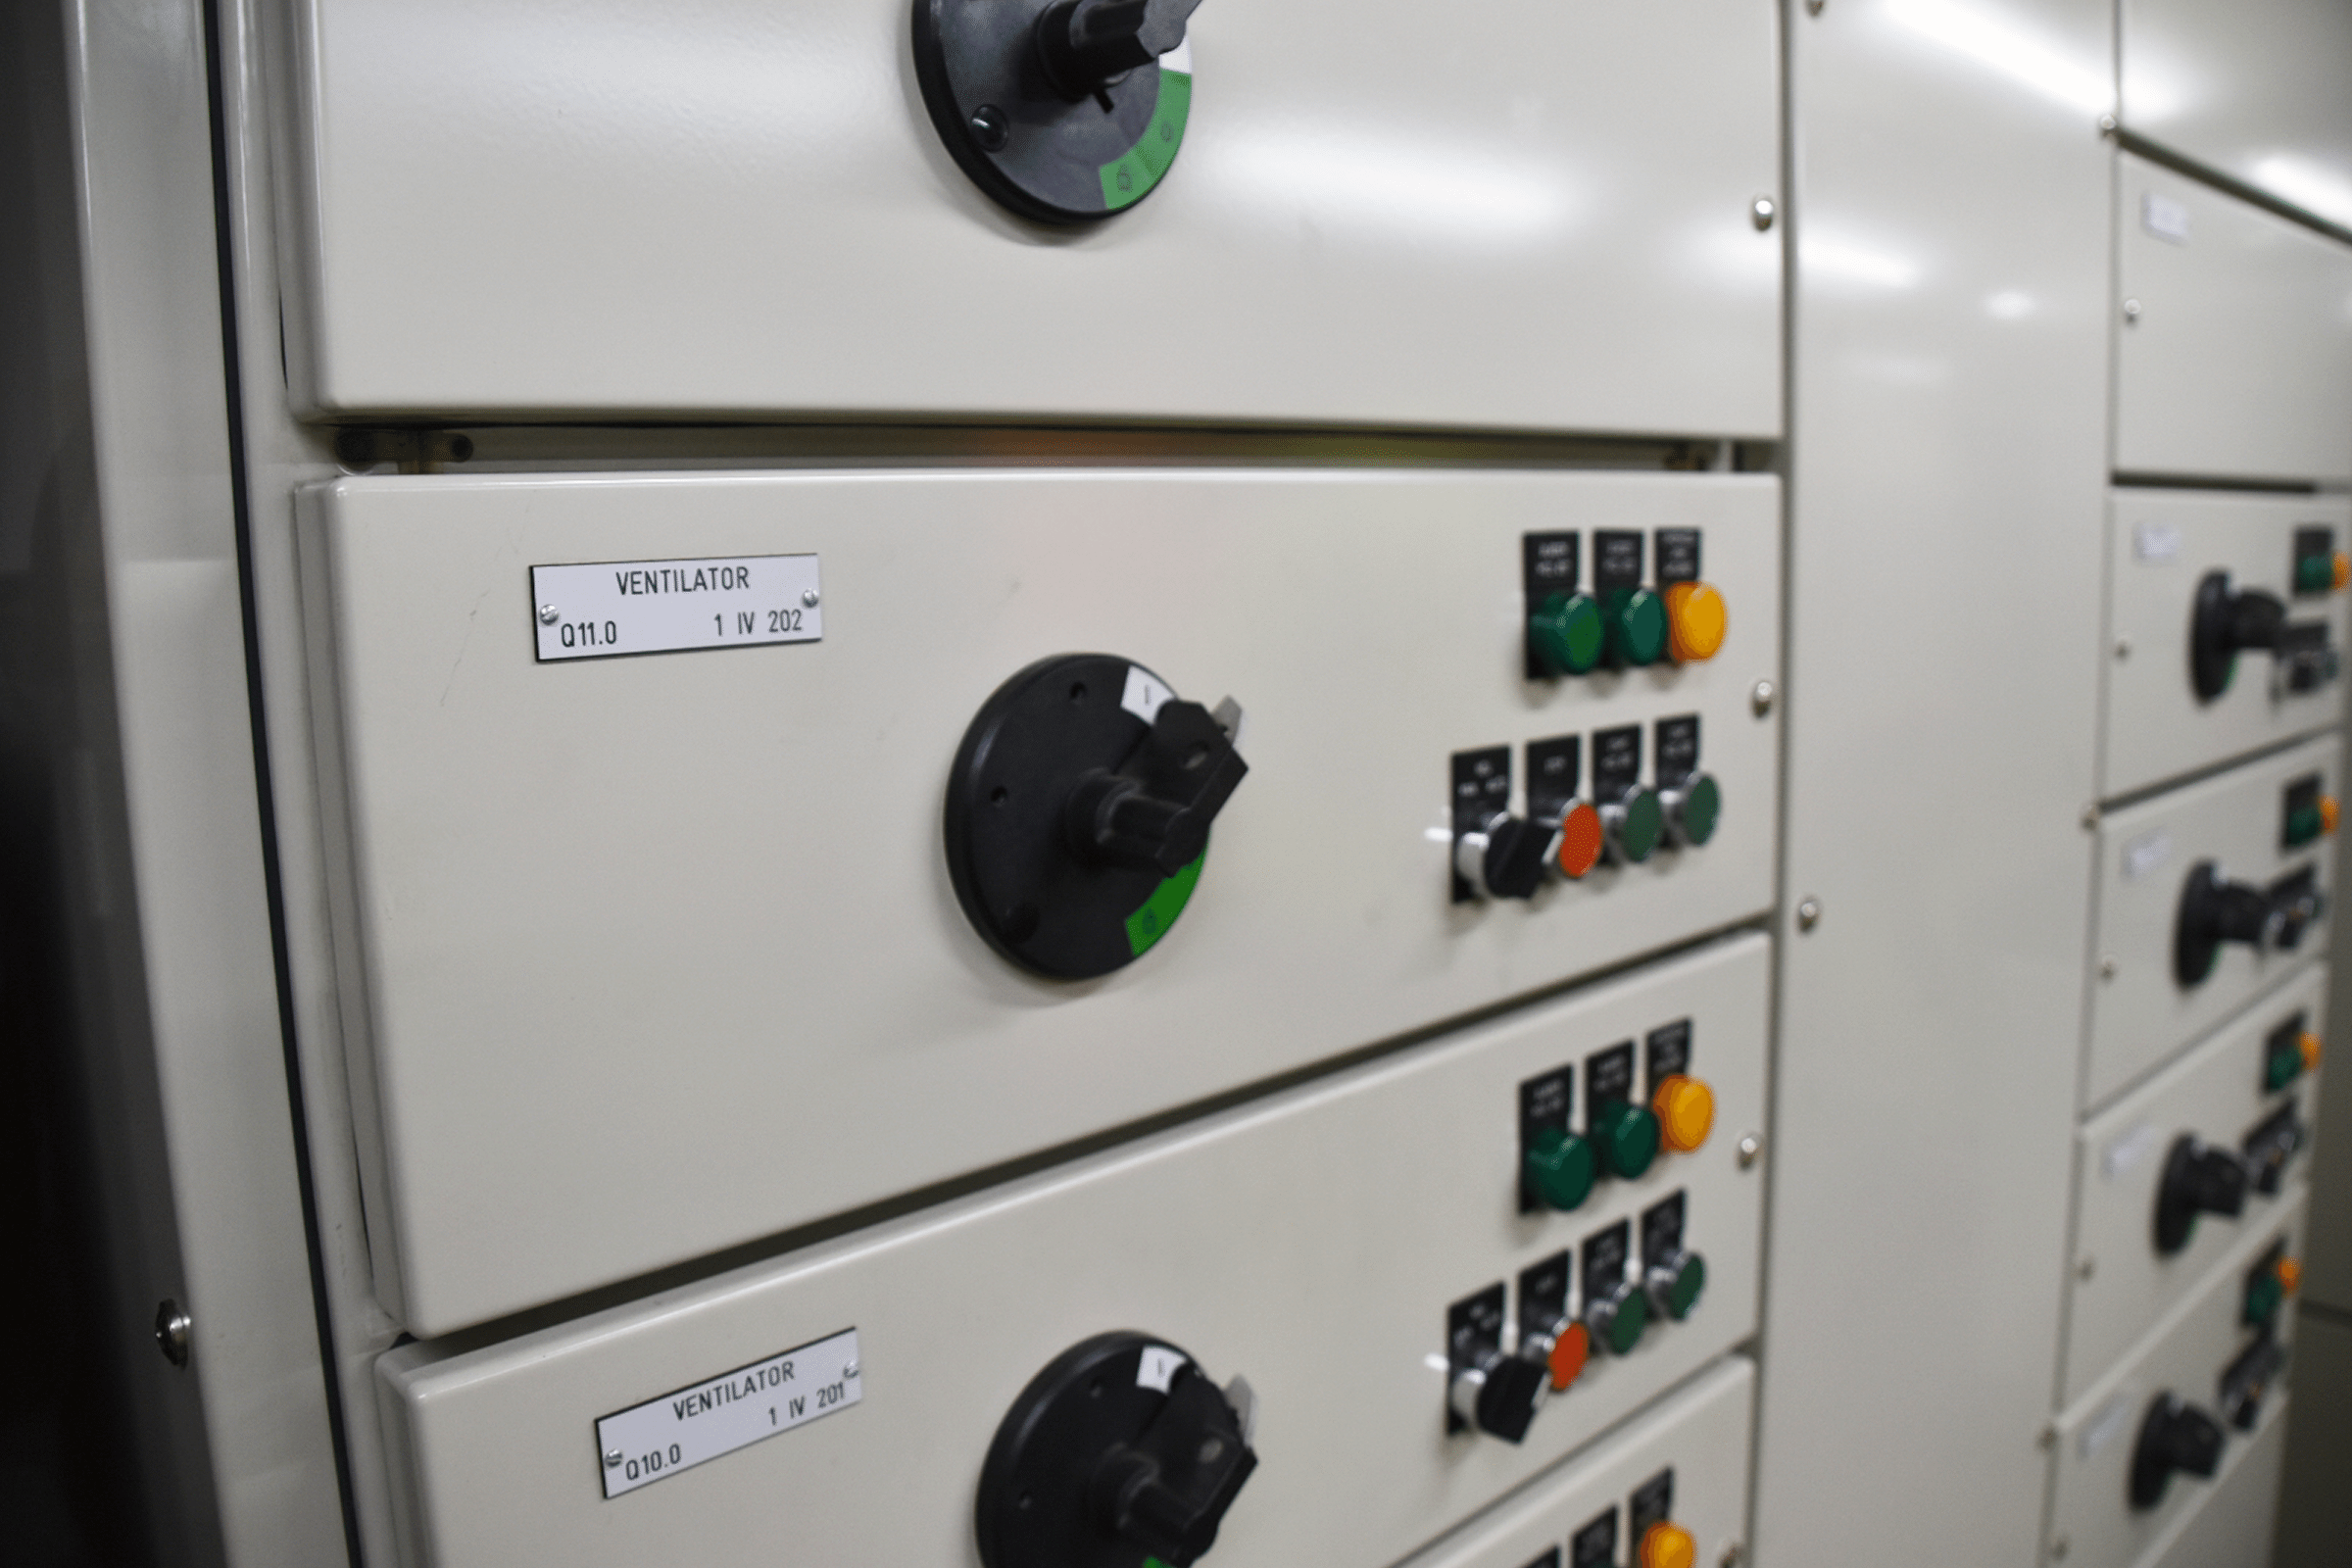 Logstrup Steel's low voltage high quality electrical switchgear include Cabinet structures which is shown on the picture